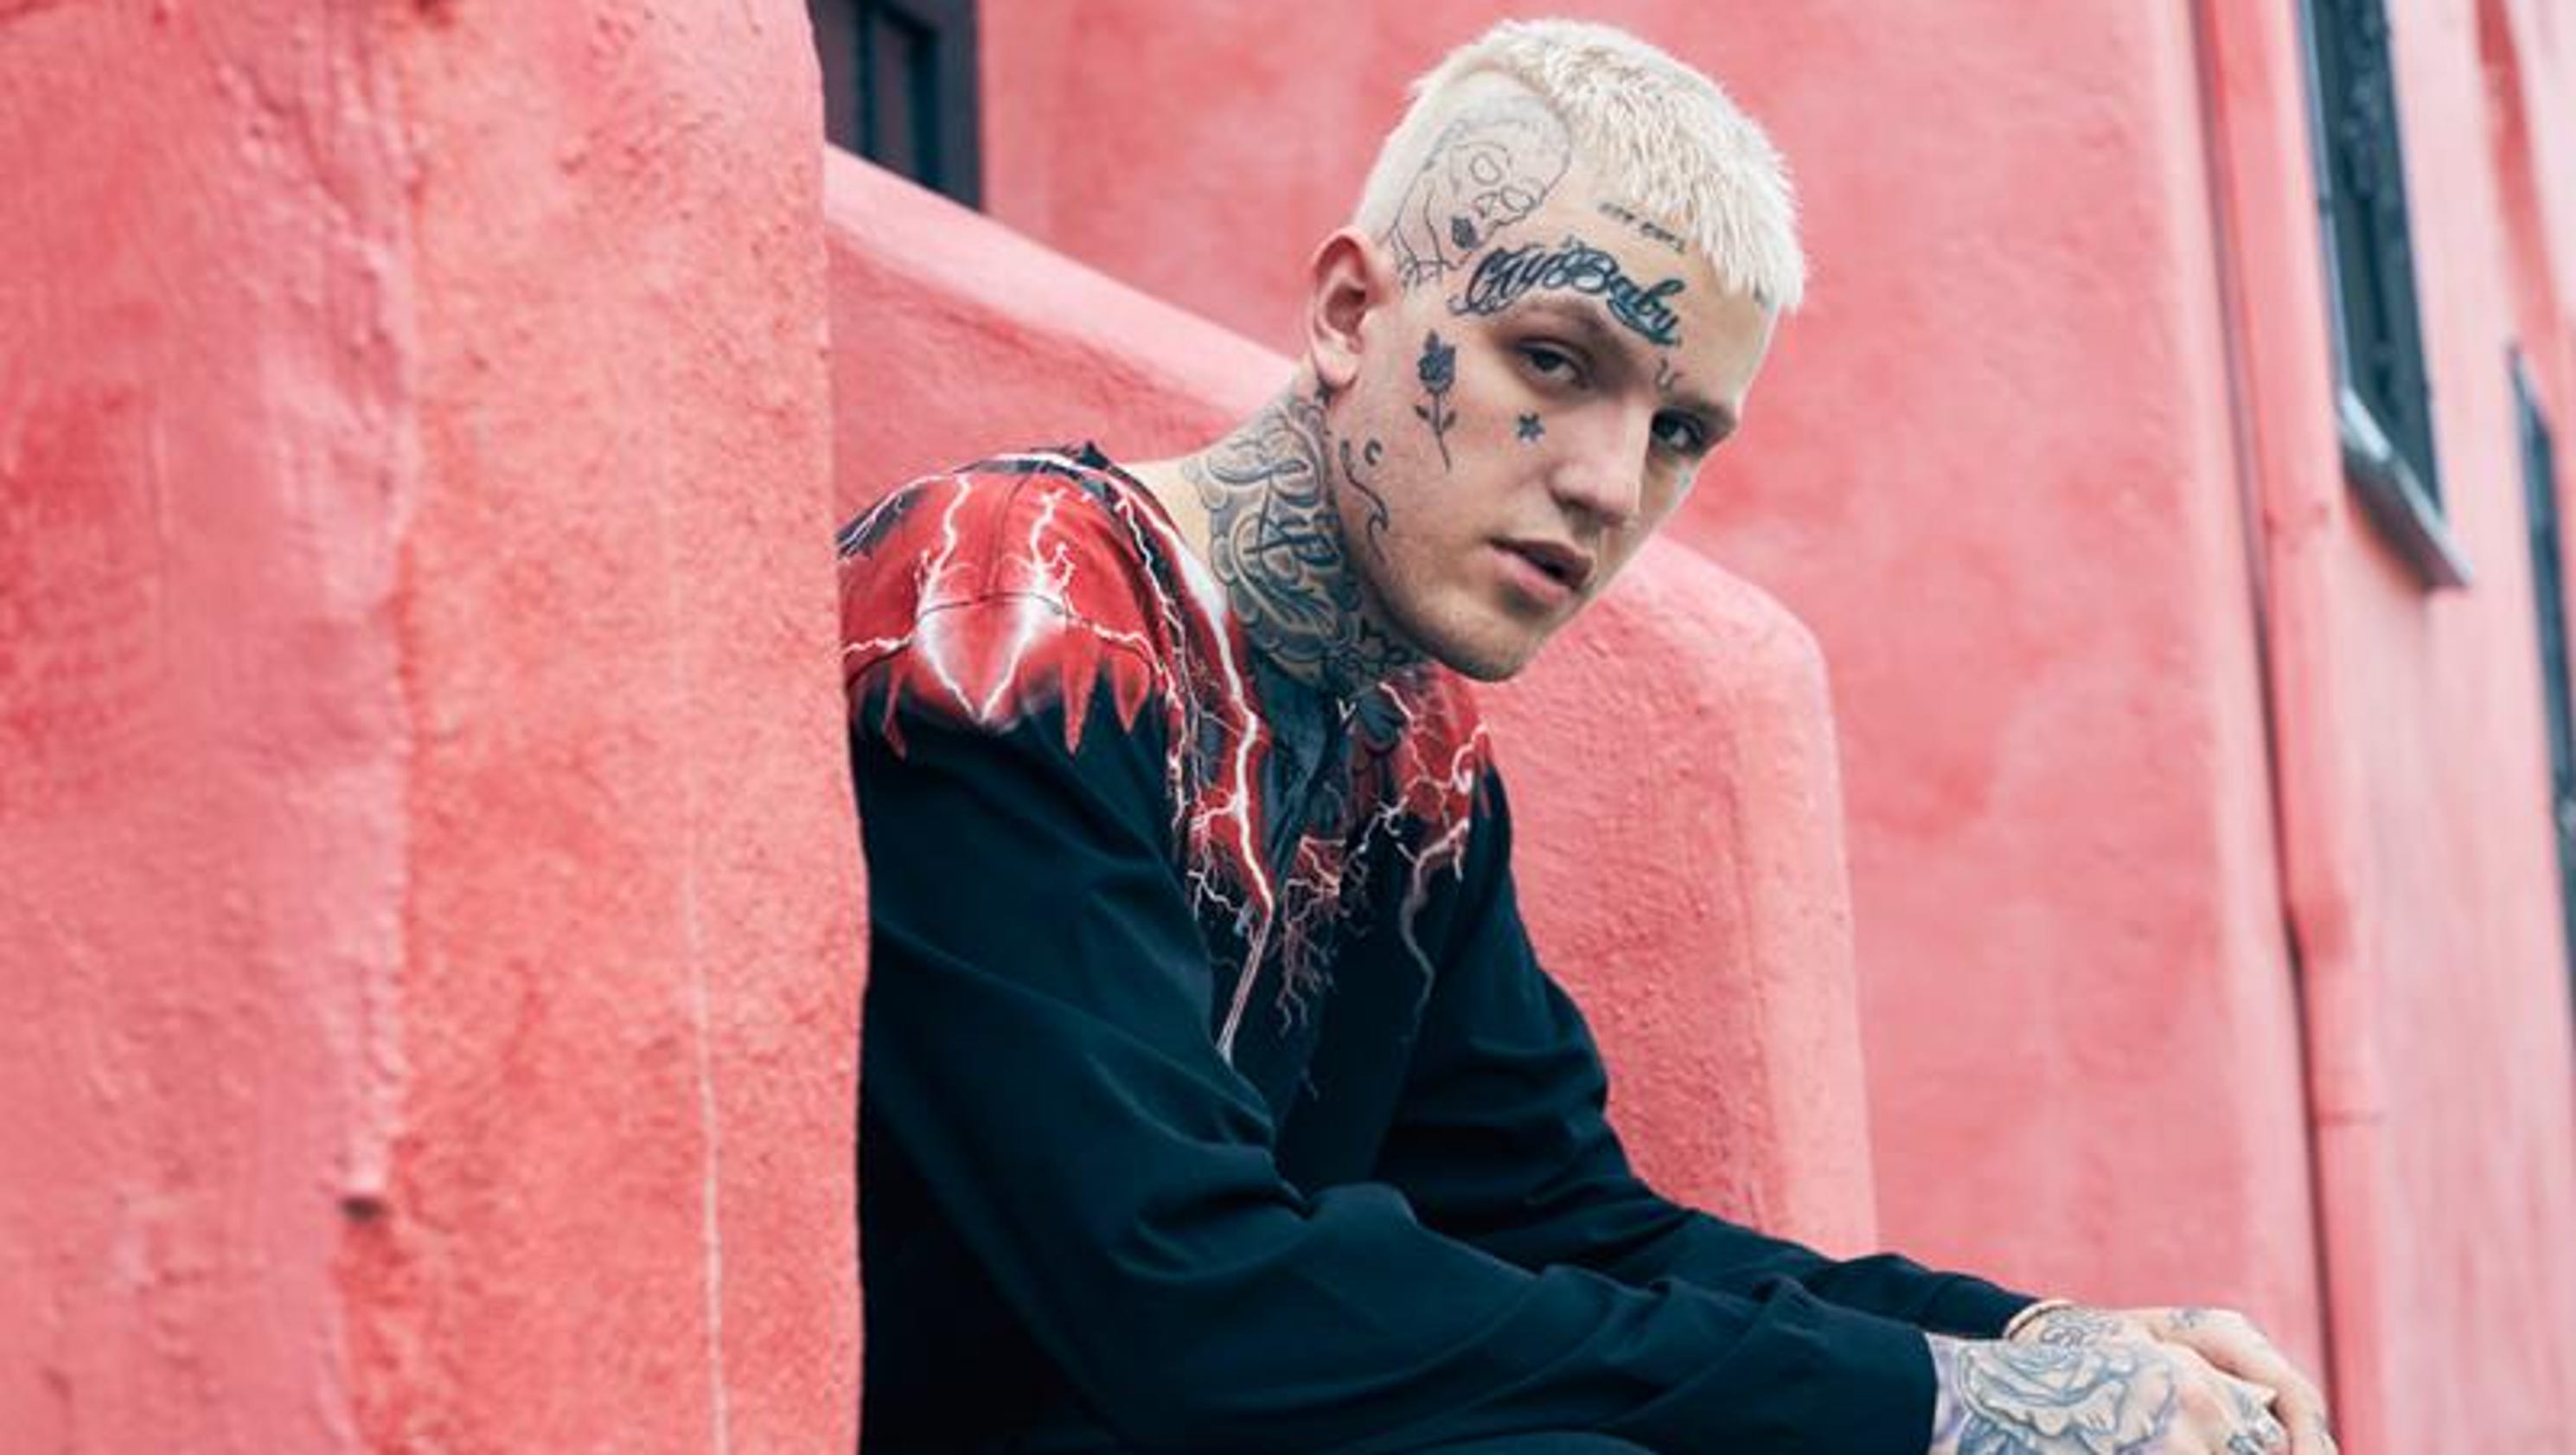 Rapper Lil Peep dies at 21, fans mourn: 'Your music changed the world'